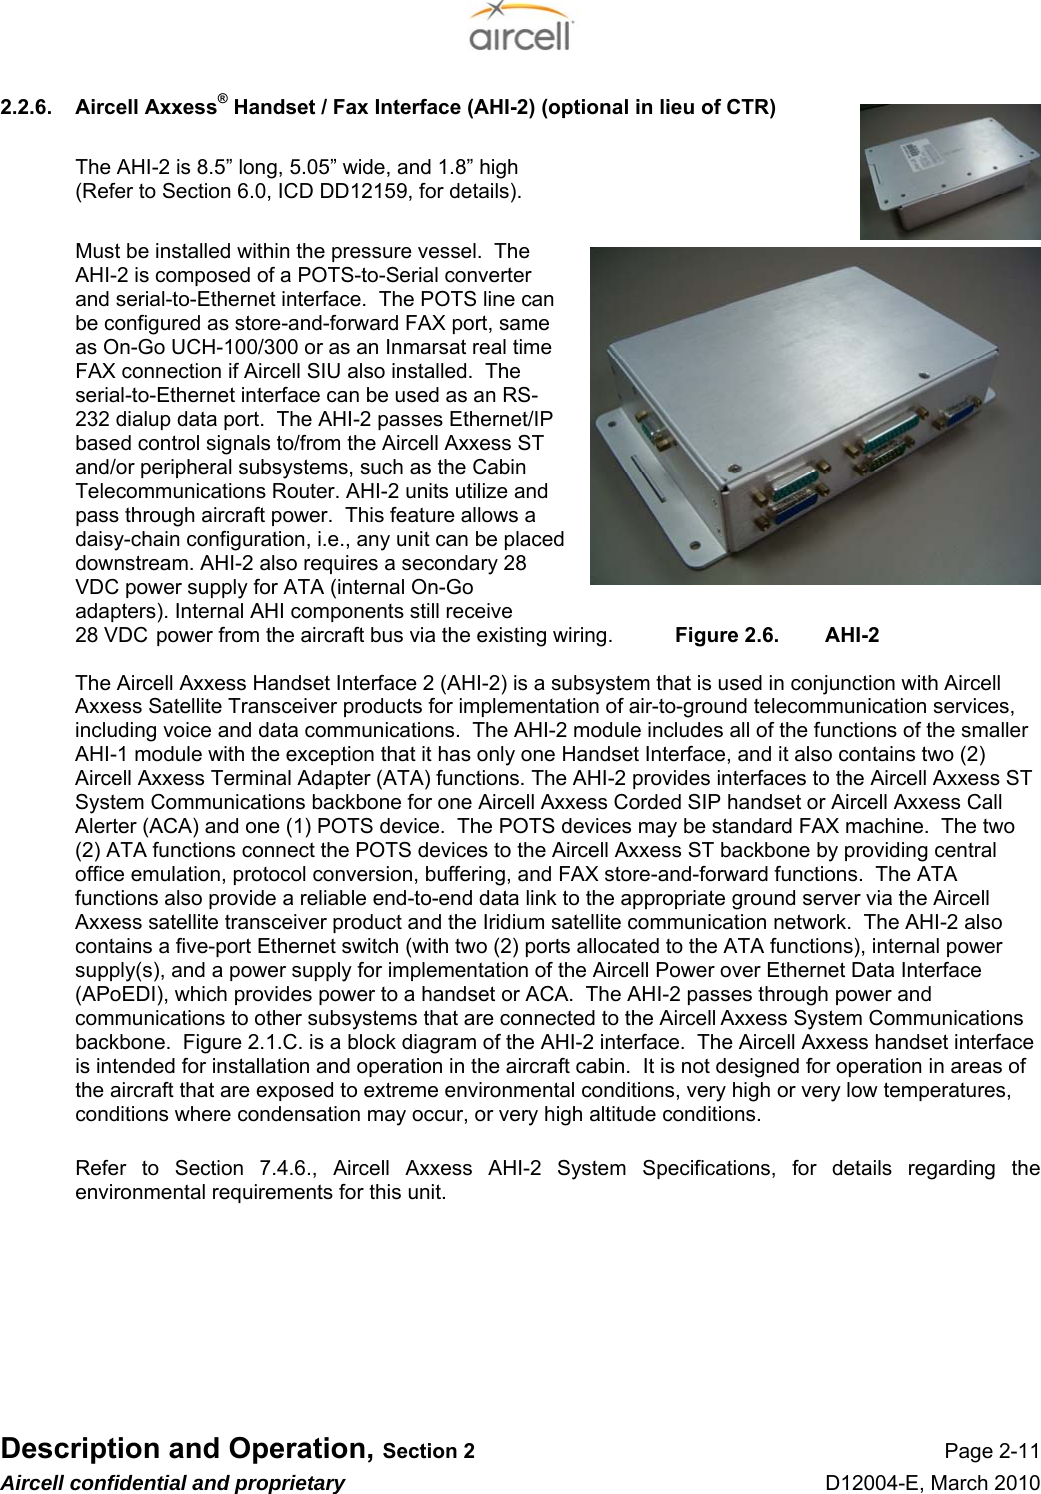  Description and Operation, Section 2 Page 2-11 Aircell confidential and proprietary D12004-E, March 2010 2.2.6.  Aircell Axxess® Handset / Fax Interface (AHI-2) (optional in lieu of CTR)  The AHI-2 is 8.5” long, 5.05” wide, and 1.8” high  (Refer to Section 6.0, ICD DD12159, for details).  Must be installed within the pressure vessel.  The AHI-2 is composed of a POTS-to-Serial converter and serial-to-Ethernet interface.  The POTS line can be configured as store-and-forward FAX port, same as On-Go UCH-100/300 or as an Inmarsat real time FAX connection if Aircell SIU also installed.  The serial-to-Ethernet interface can be used as an RS-232 dialup data port.  The AHI-2 passes Ethernet/IP based control signals to/from the Aircell Axxess ST and/or peripheral subsystems, such as the Cabin Telecommunications Router. AHI-2 units utilize and pass through aircraft power.  This feature allows a daisy-chain configuration, i.e., any unit can be placed downstream. AHI-2 also requires a secondary 28 VDC power supply for ATA (internal On-Go adapters). Internal AHI components still receive  28 VDC  power from the aircraft bus via the existing wiring.  Figure 2.6.  AHI-2  The Aircell Axxess Handset Interface 2 (AHI-2) is a subsystem that is used in conjunction with Aircell Axxess Satellite Transceiver products for implementation of air-to-ground telecommunication services, including voice and data communications.  The AHI-2 module includes all of the functions of the smaller AHI-1 module with the exception that it has only one Handset Interface, and it also contains two (2) Aircell Axxess Terminal Adapter (ATA) functions. The AHI-2 provides interfaces to the Aircell Axxess ST System Communications backbone for one Aircell Axxess Corded SIP handset or Aircell Axxess Call Alerter (ACA) and one (1) POTS device.  The POTS devices may be standard FAX machine.  The two (2) ATA functions connect the POTS devices to the Aircell Axxess ST backbone by providing central office emulation, protocol conversion, buffering, and FAX store-and-forward functions.  The ATA functions also provide a reliable end-to-end data link to the appropriate ground server via the Aircell Axxess satellite transceiver product and the Iridium satellite communication network.  The AHI-2 also contains a five-port Ethernet switch (with two (2) ports allocated to the ATA functions), internal power supply(s), and a power supply for implementation of the Aircell Power over Ethernet Data Interface (APoEDI), which provides power to a handset or ACA.  The AHI-2 passes through power and communications to other subsystems that are connected to the Aircell Axxess System Communications backbone.  Figure 2.1.C. is a block diagram of the AHI-2 interface.  The Aircell Axxess handset interface is intended for installation and operation in the aircraft cabin.  It is not designed for operation in areas of the aircraft that are exposed to extreme environmental conditions, very high or very low temperatures, conditions where condensation may occur, or very high altitude conditions.  Refer to Section 7.4.6., Aircell Axxess AHI-2 System Specifications, for details regarding the environmental requirements for this unit.    